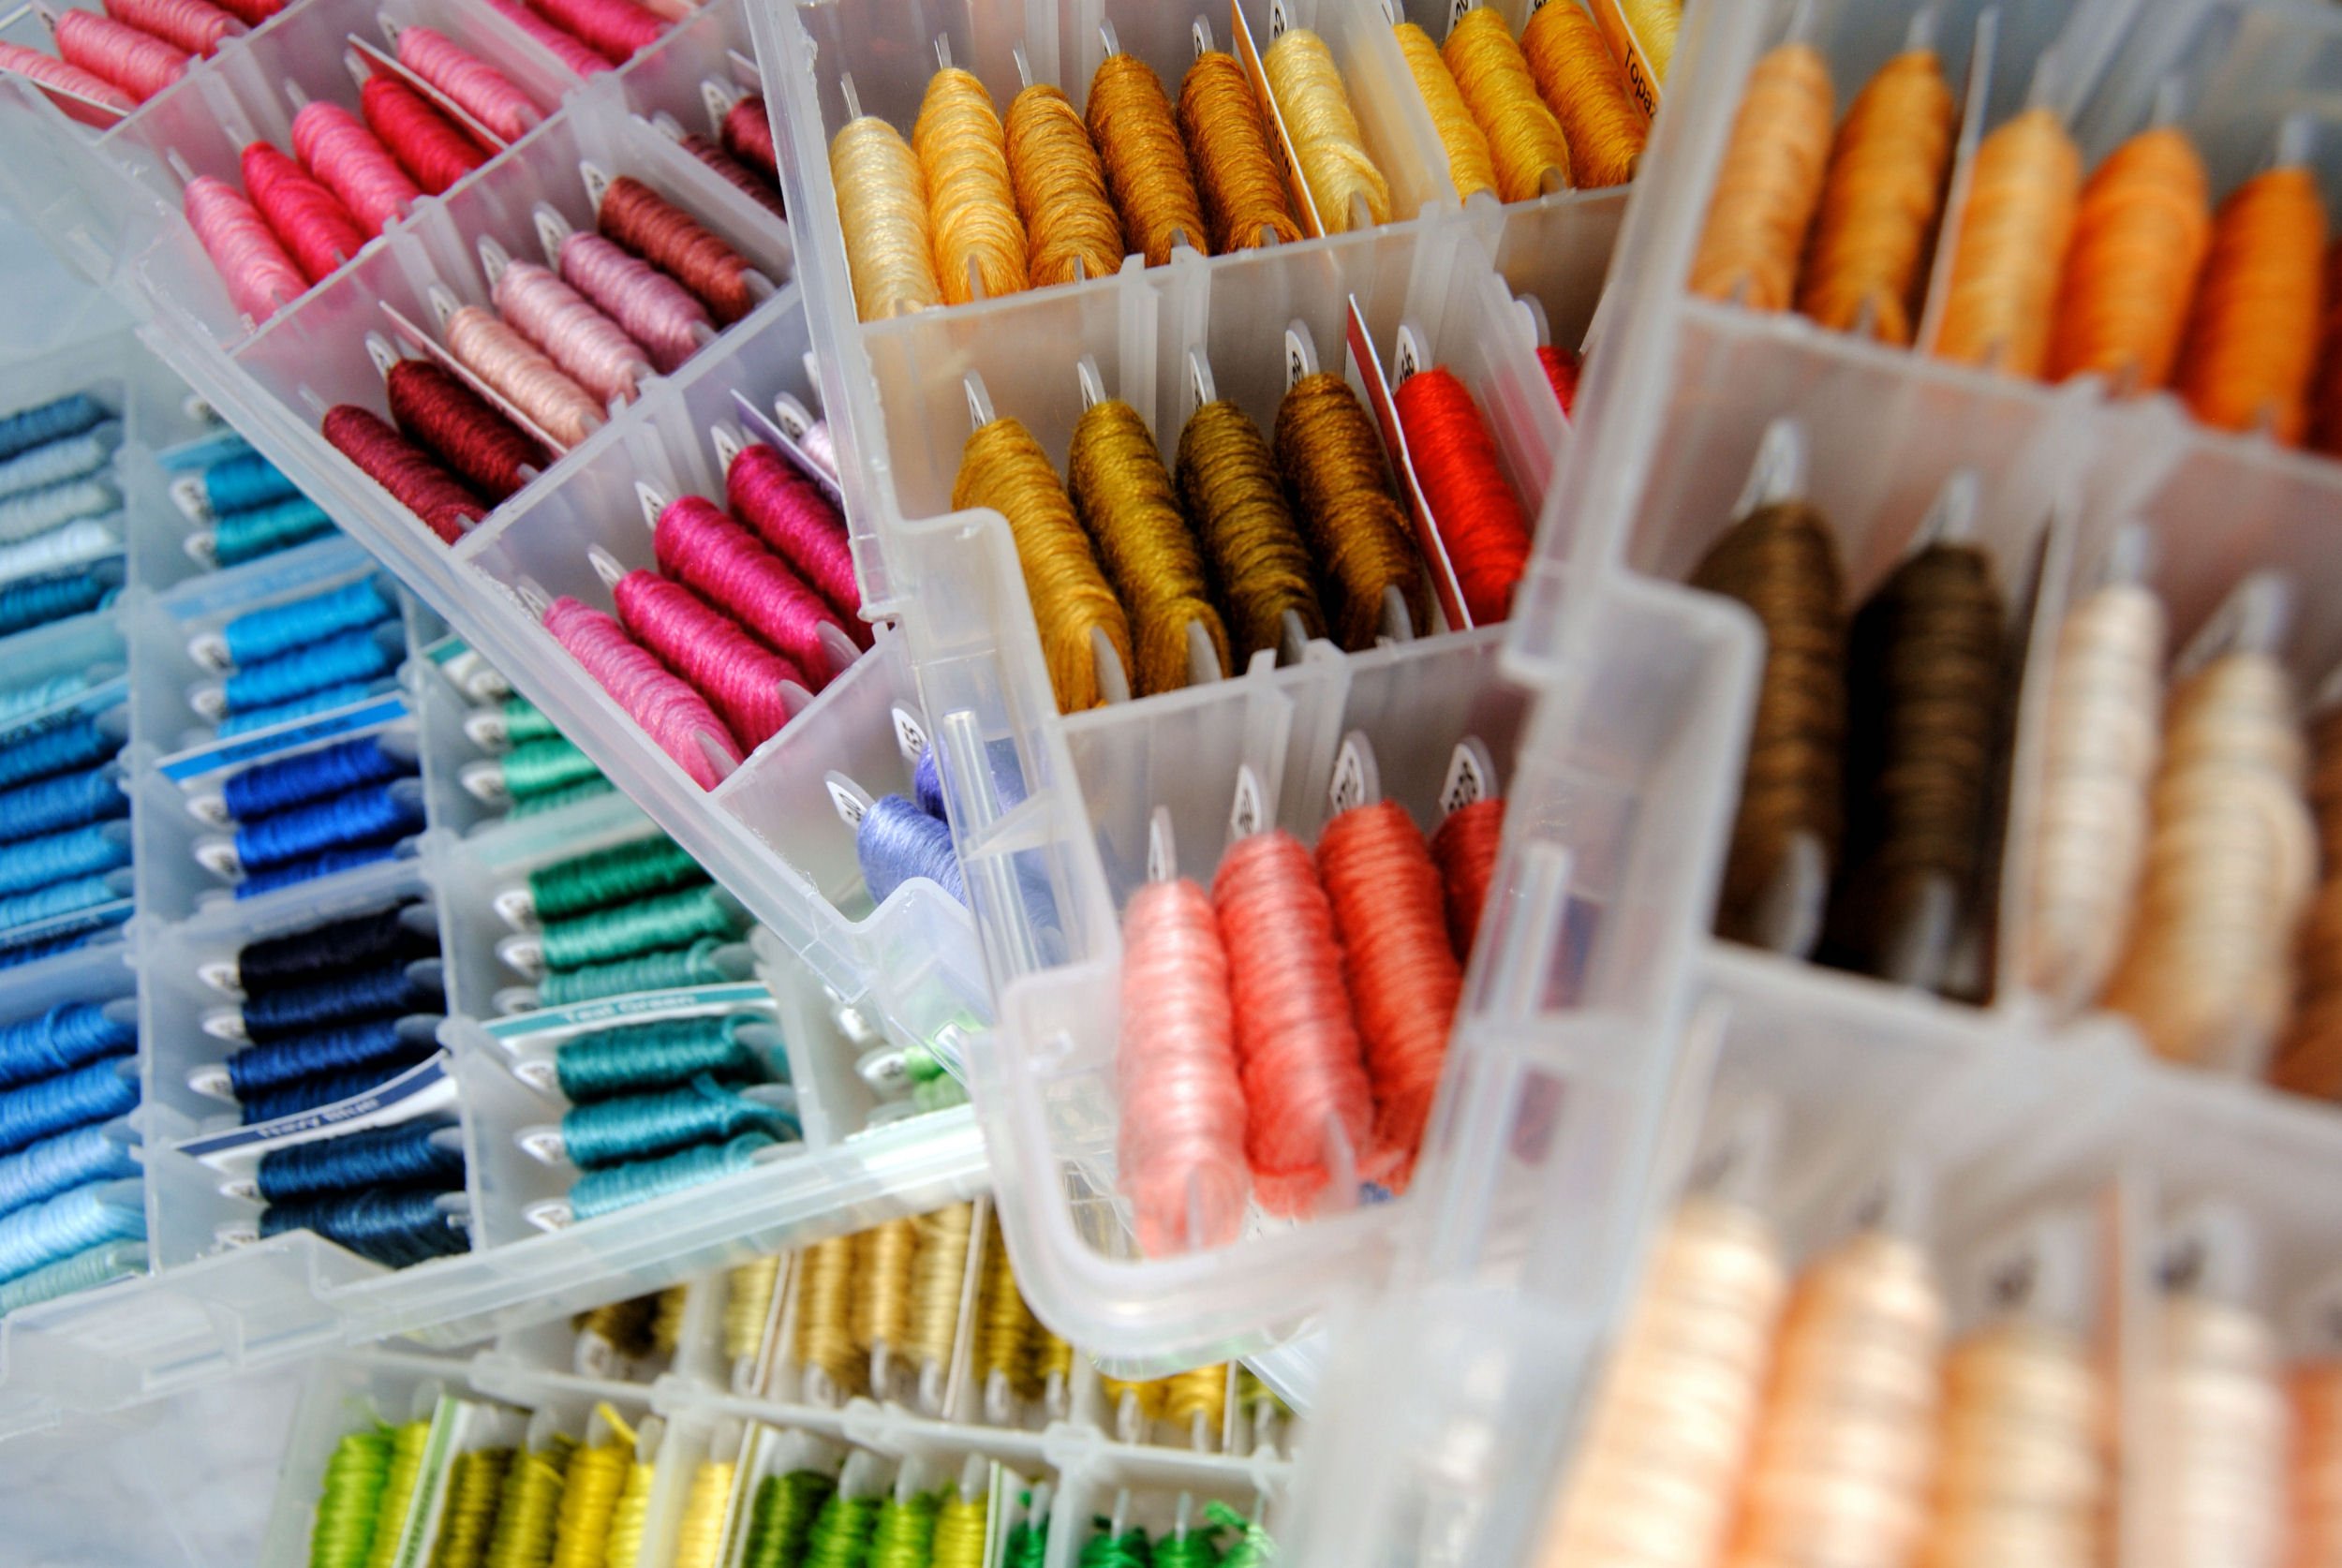 Thread Organization for Cross Stitch and Embroidery